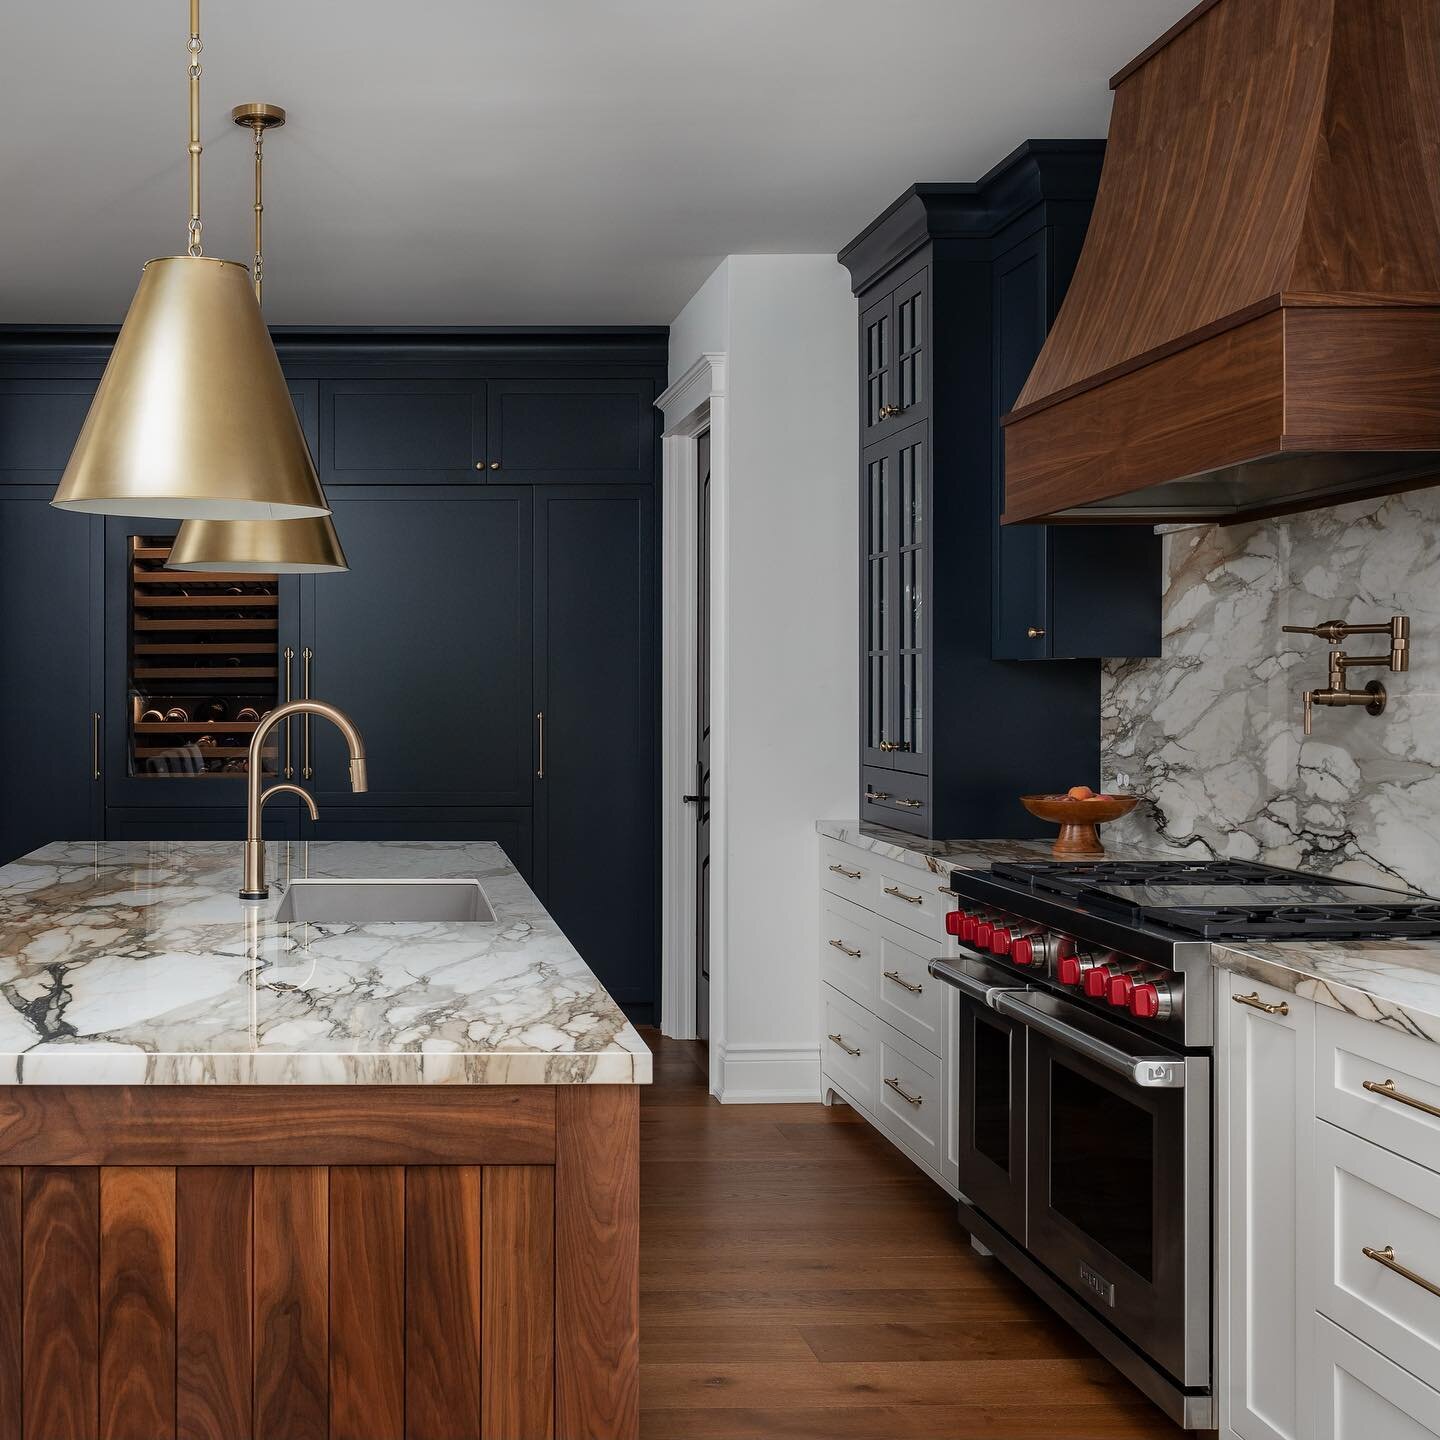 Rich colours take main stage in this kitchen remodel, and we can&rsquo;t get enough of the dark black cabinet colour with dark blue undertones. Soot (2129-20 by Benjamin Moore) is an understated - serious, even -  warm black with versatility. It also